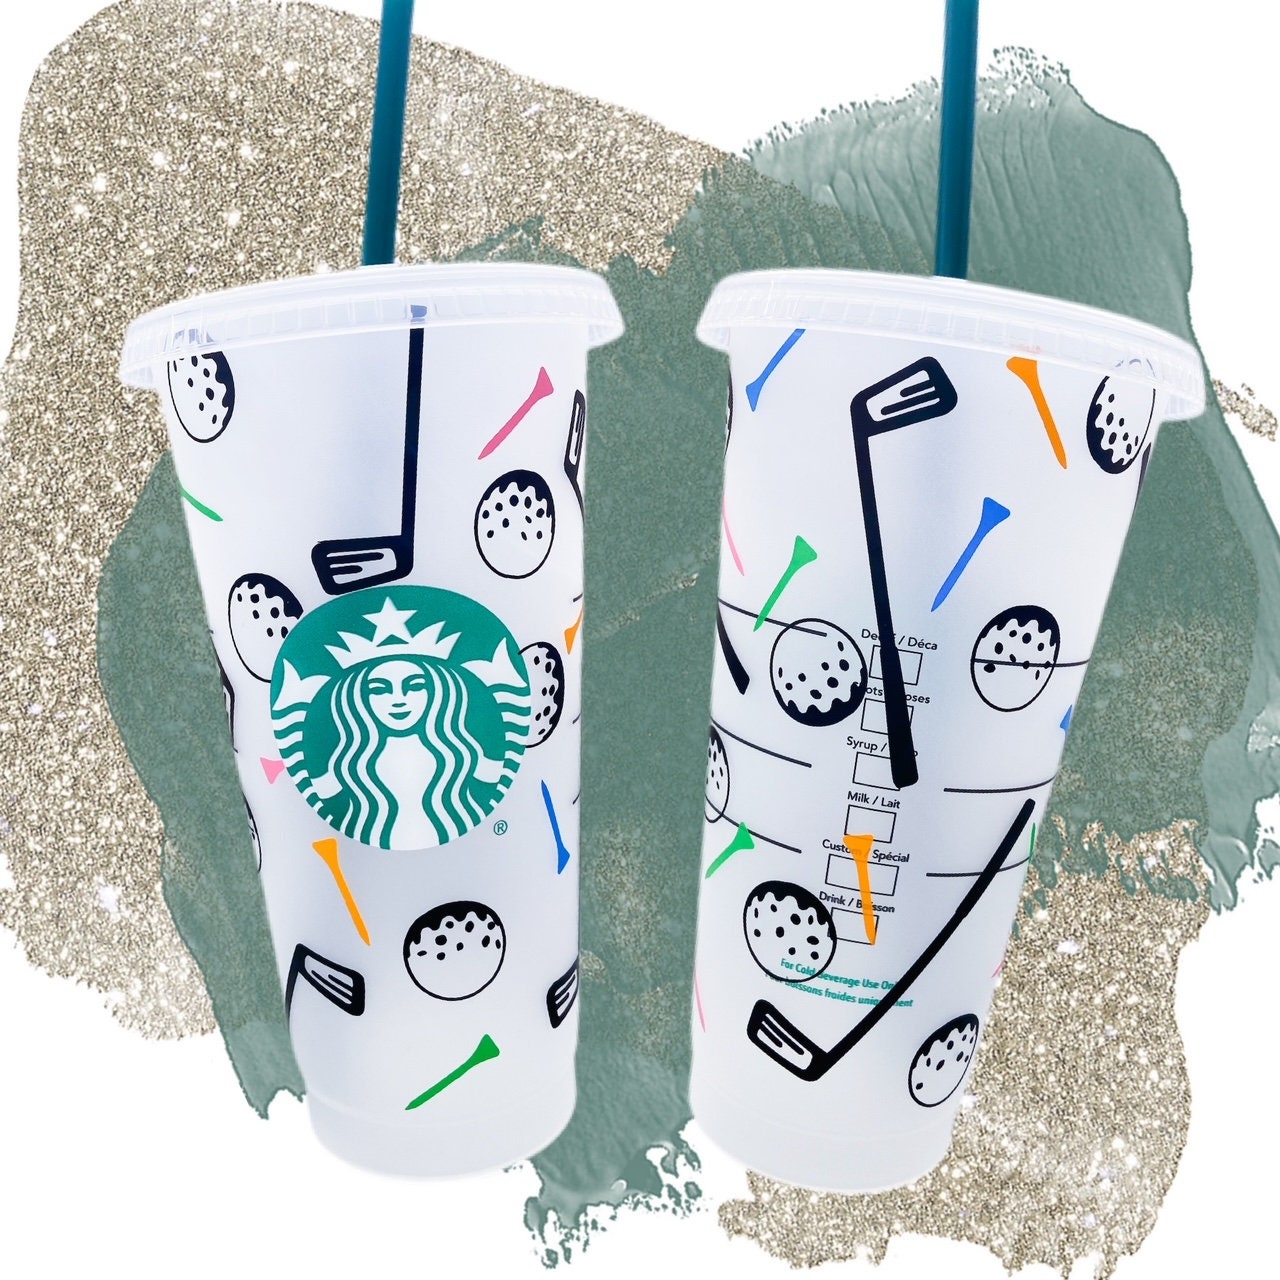 Chanel inspired Starbucks Cup [Video]